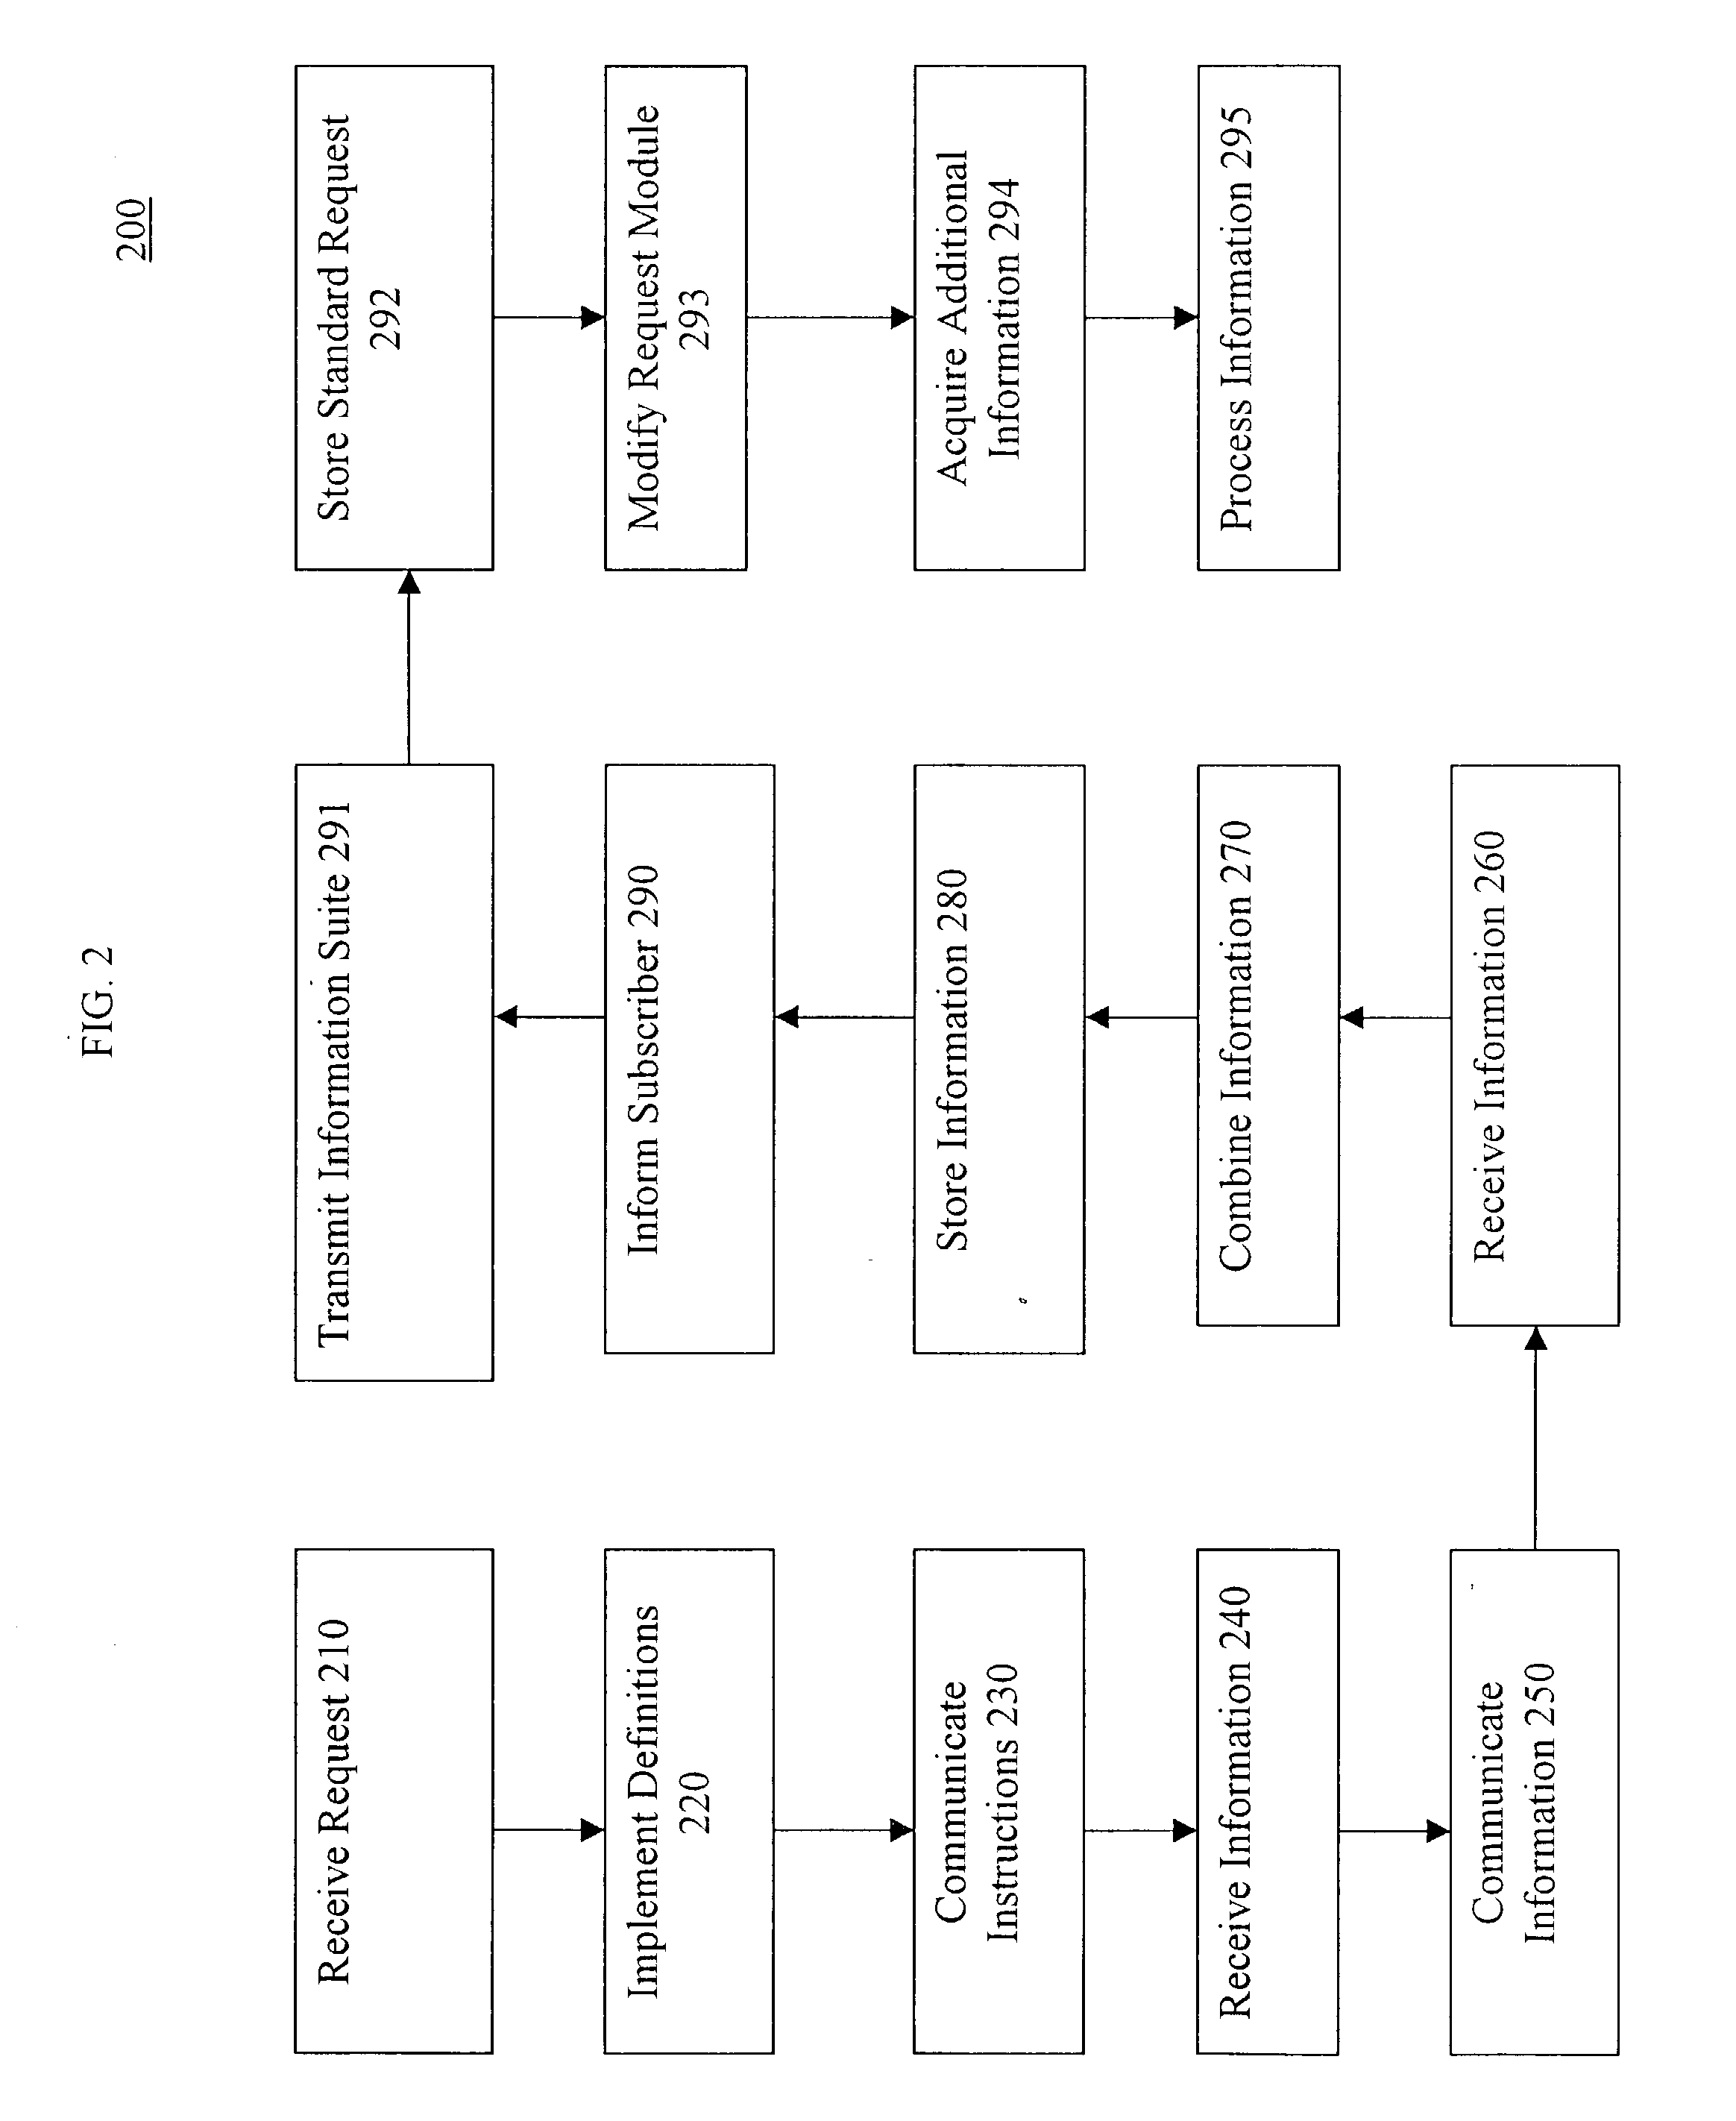 System and method for facilitating information collection, storage, and distribution